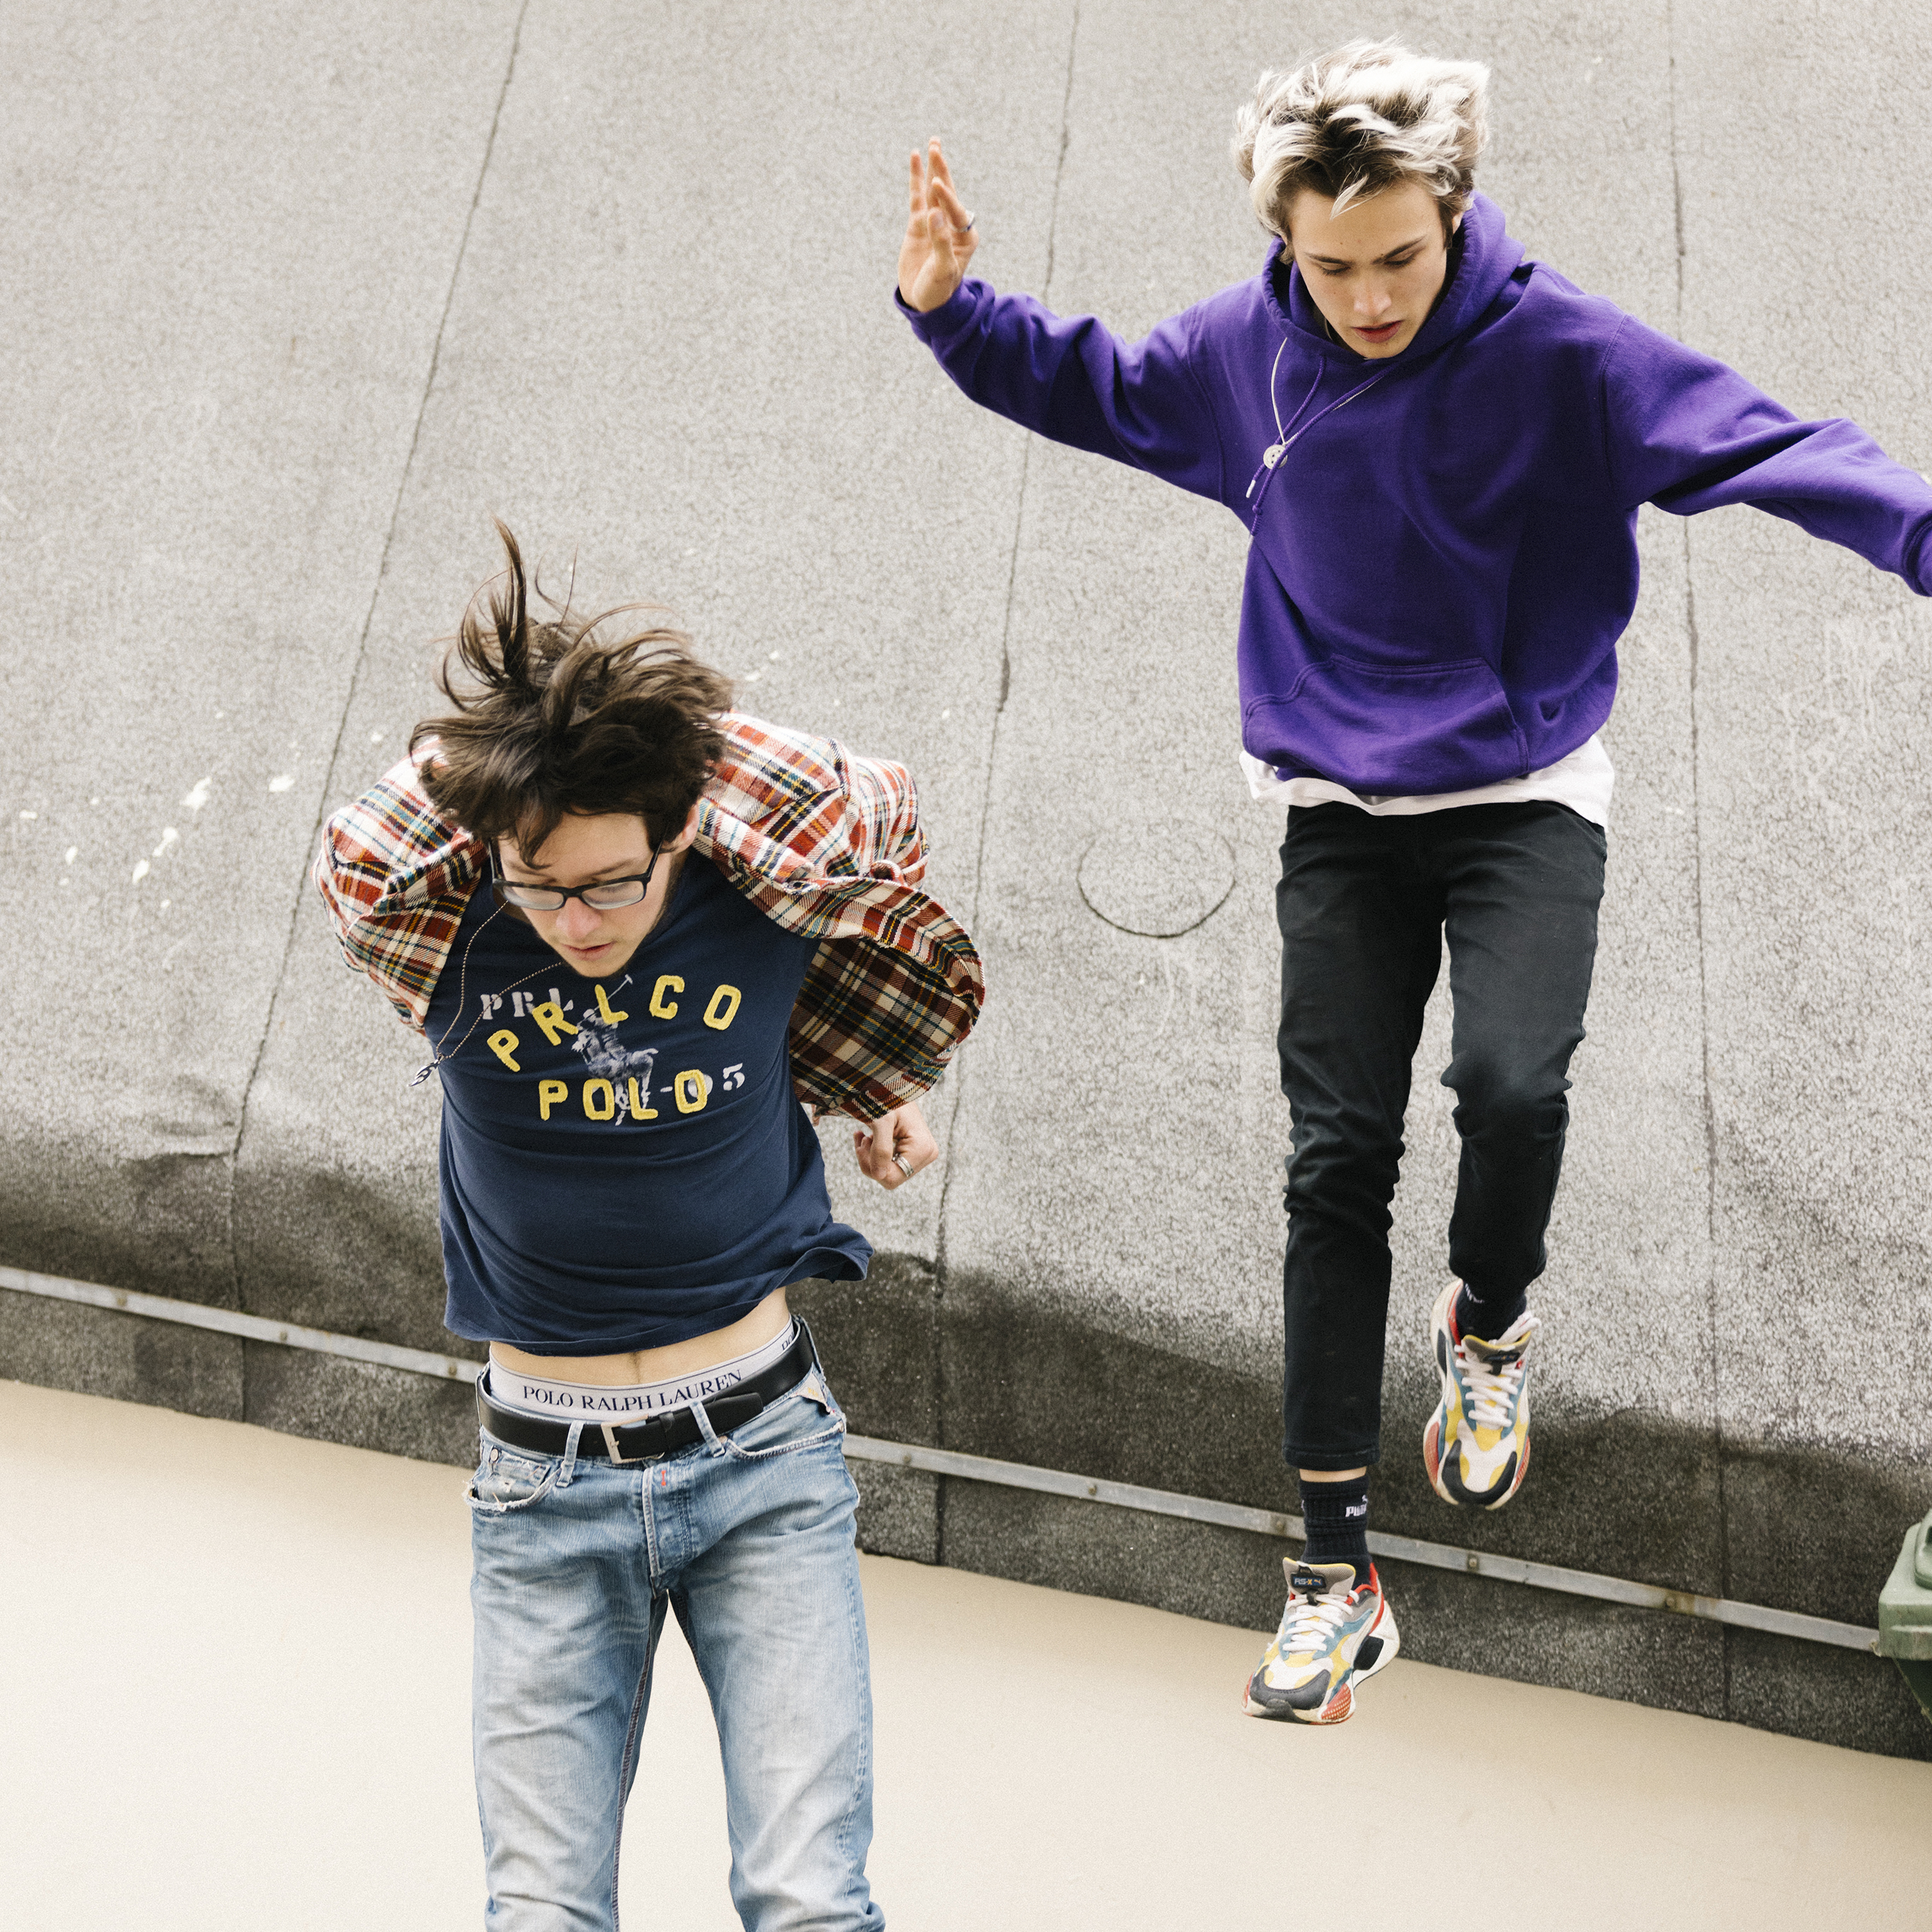 Two teenagers jump from a roof with a concentrated gaze.